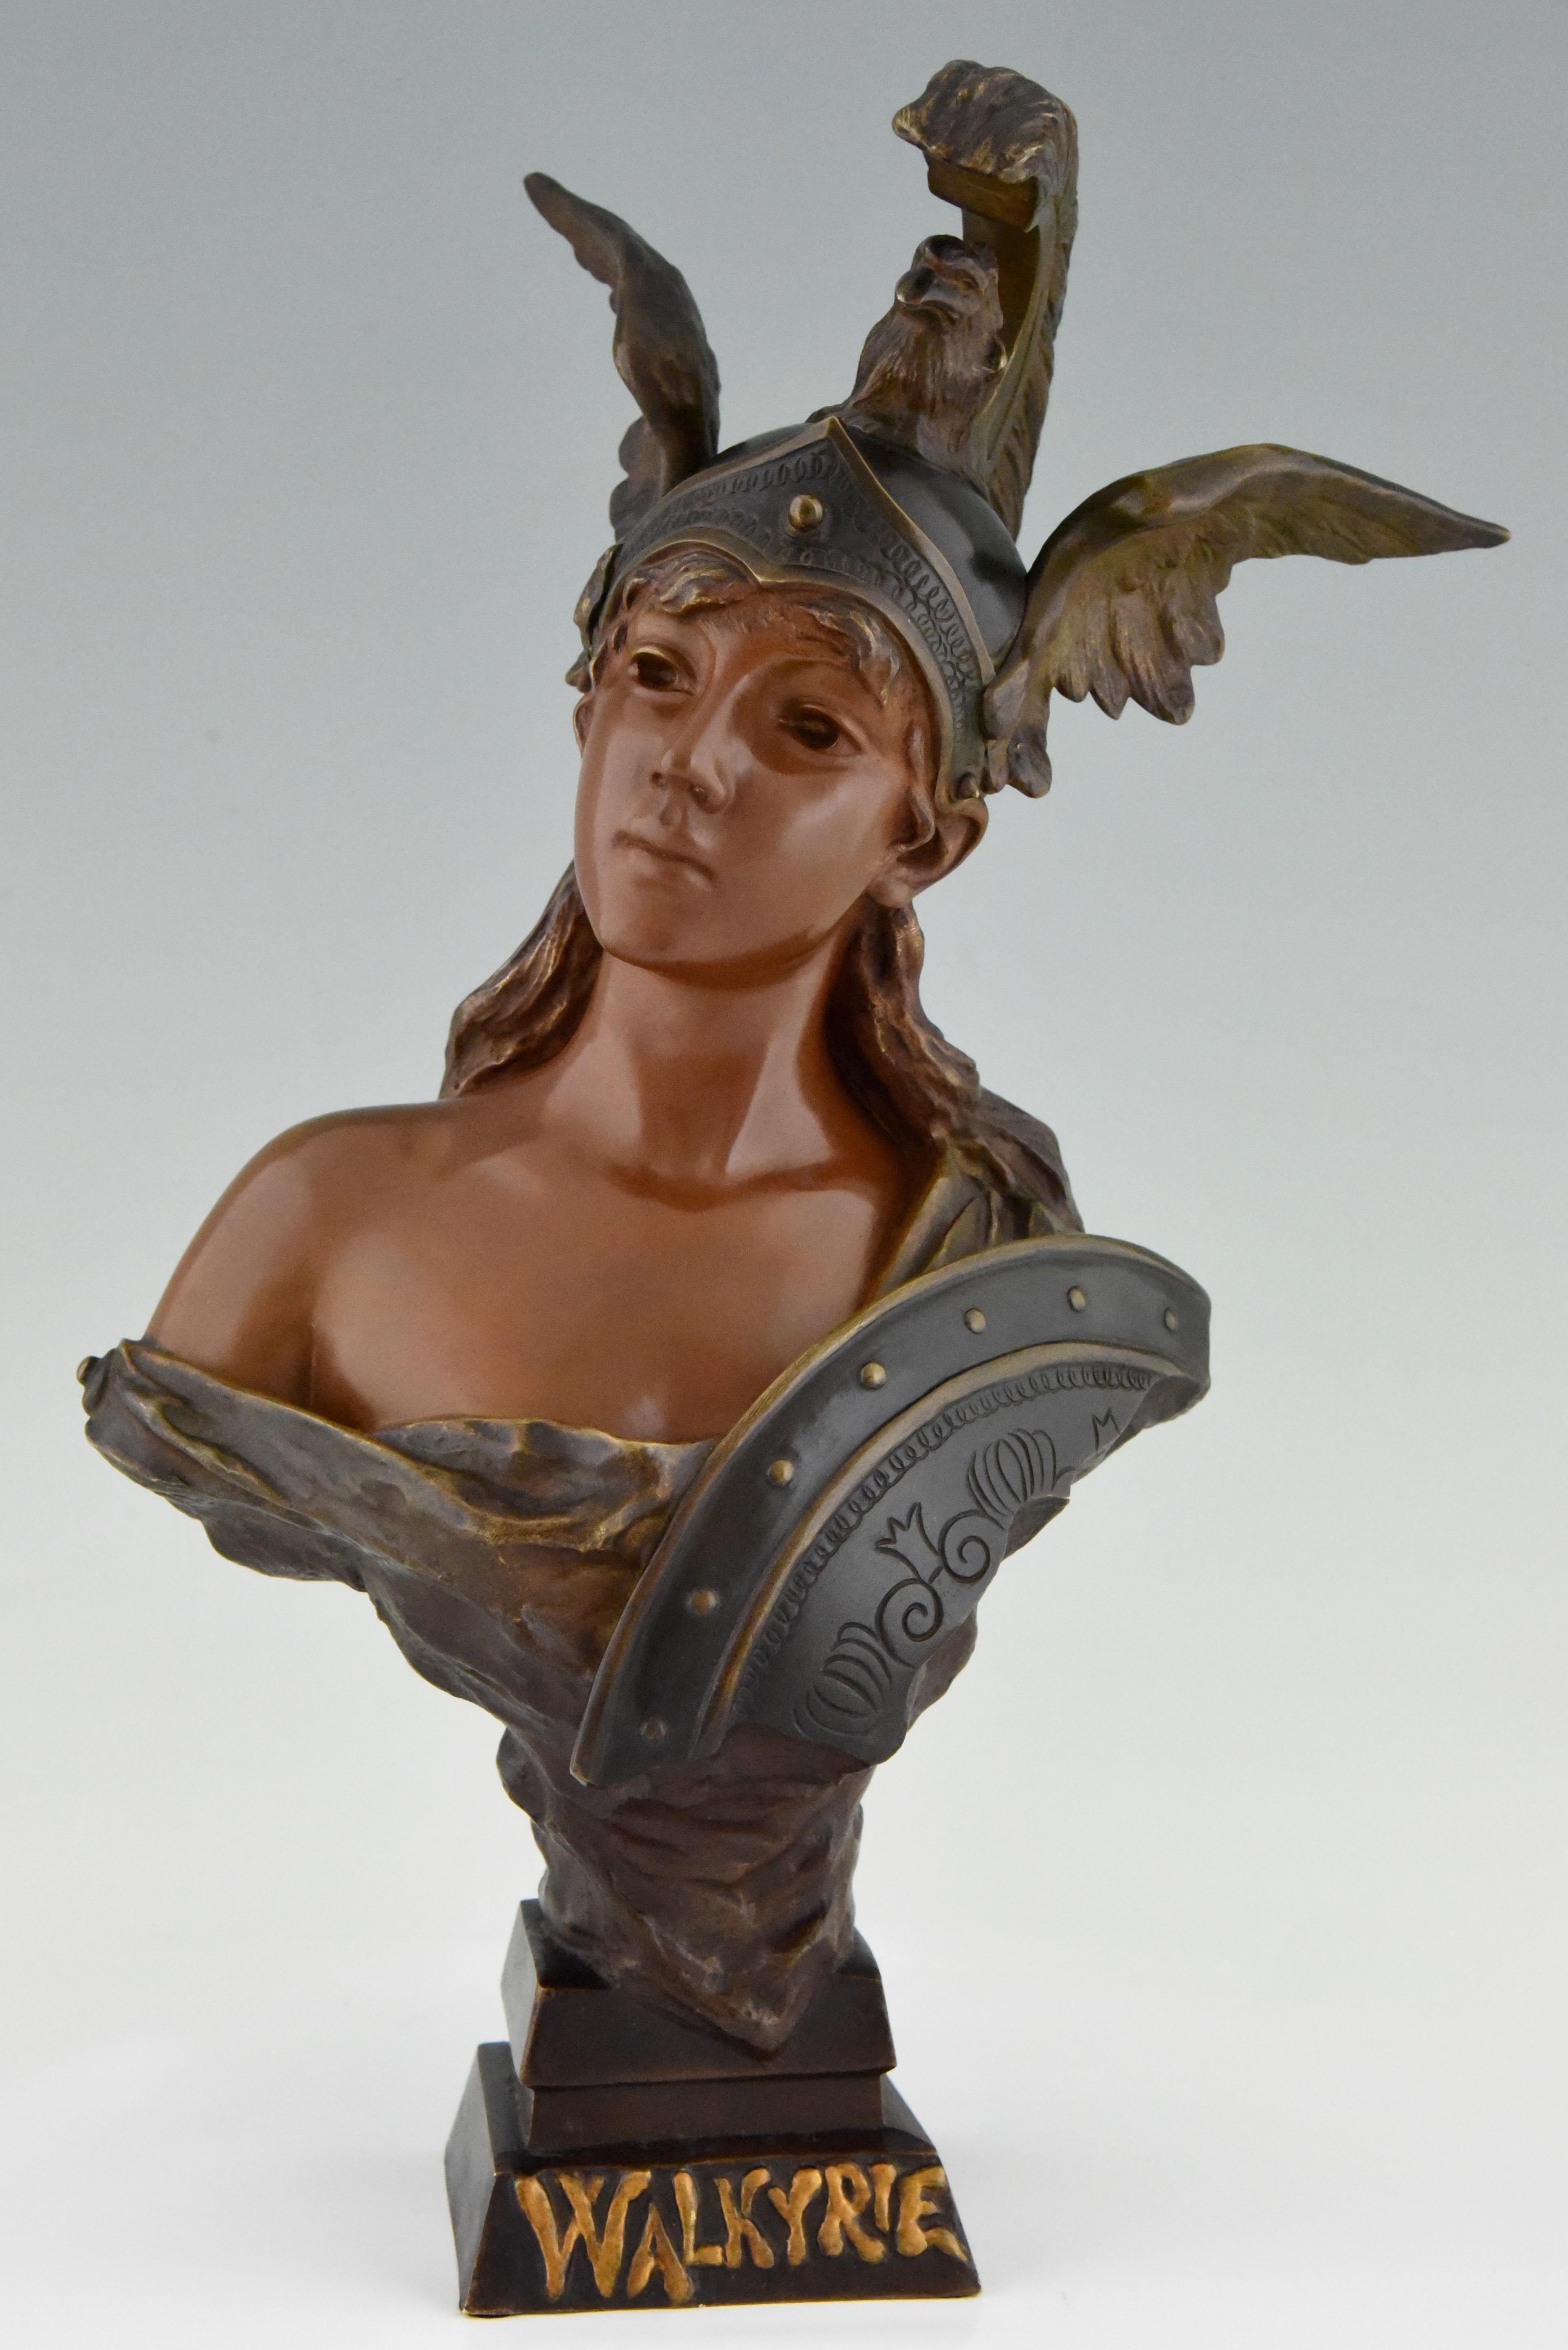 Walkyrie or Valkyrie Art Nouveau bronze sculpture of a woman with feathered helmet and shield. Signed by Emmanule Villanis and with the foundry seal of the Sociéte des bronzes de Paris. Beautiful multi-color patina, France, circa 1900

This model